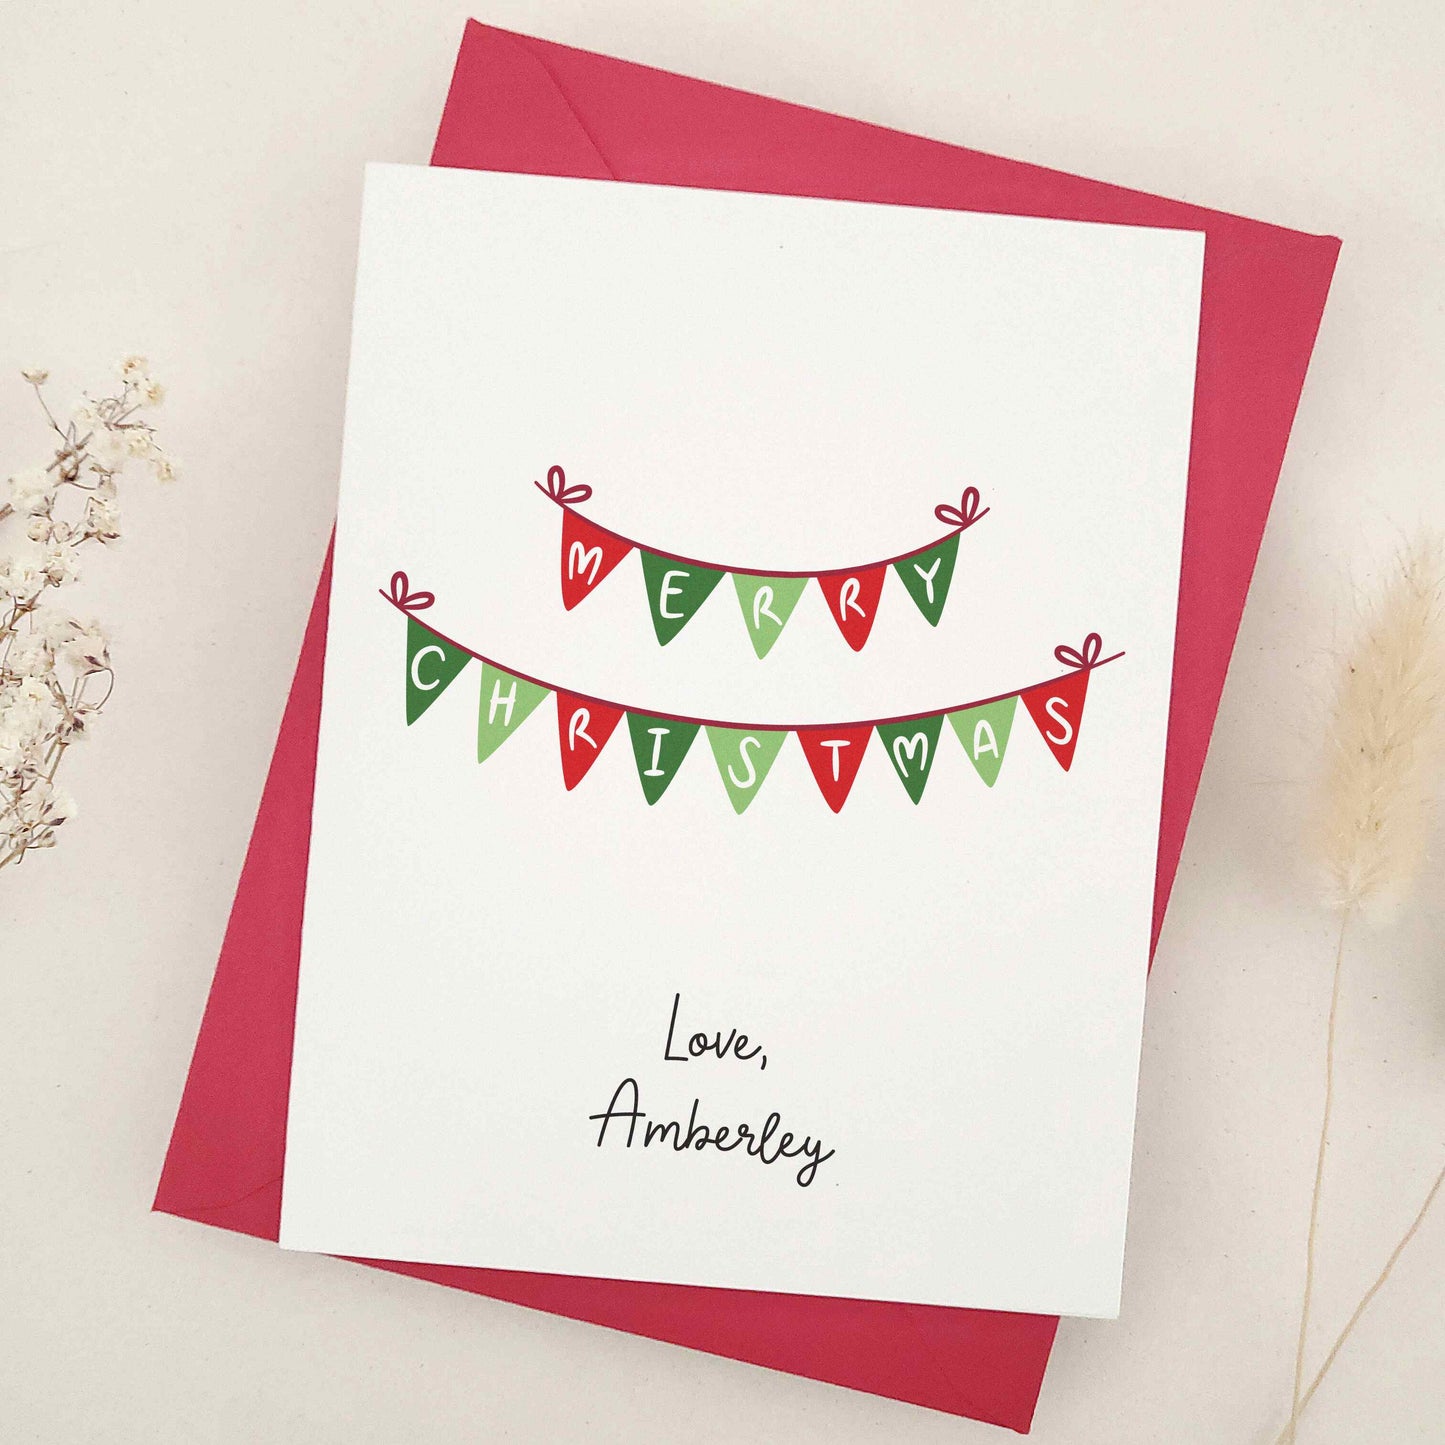 Embrace the festive season with our classic 'Merry Christmas' card: a beautifully simple yet elegant choice featuring traditional Christmas bunting in warm holiday colors, delicately spelling out heartfelt holiday greetings.